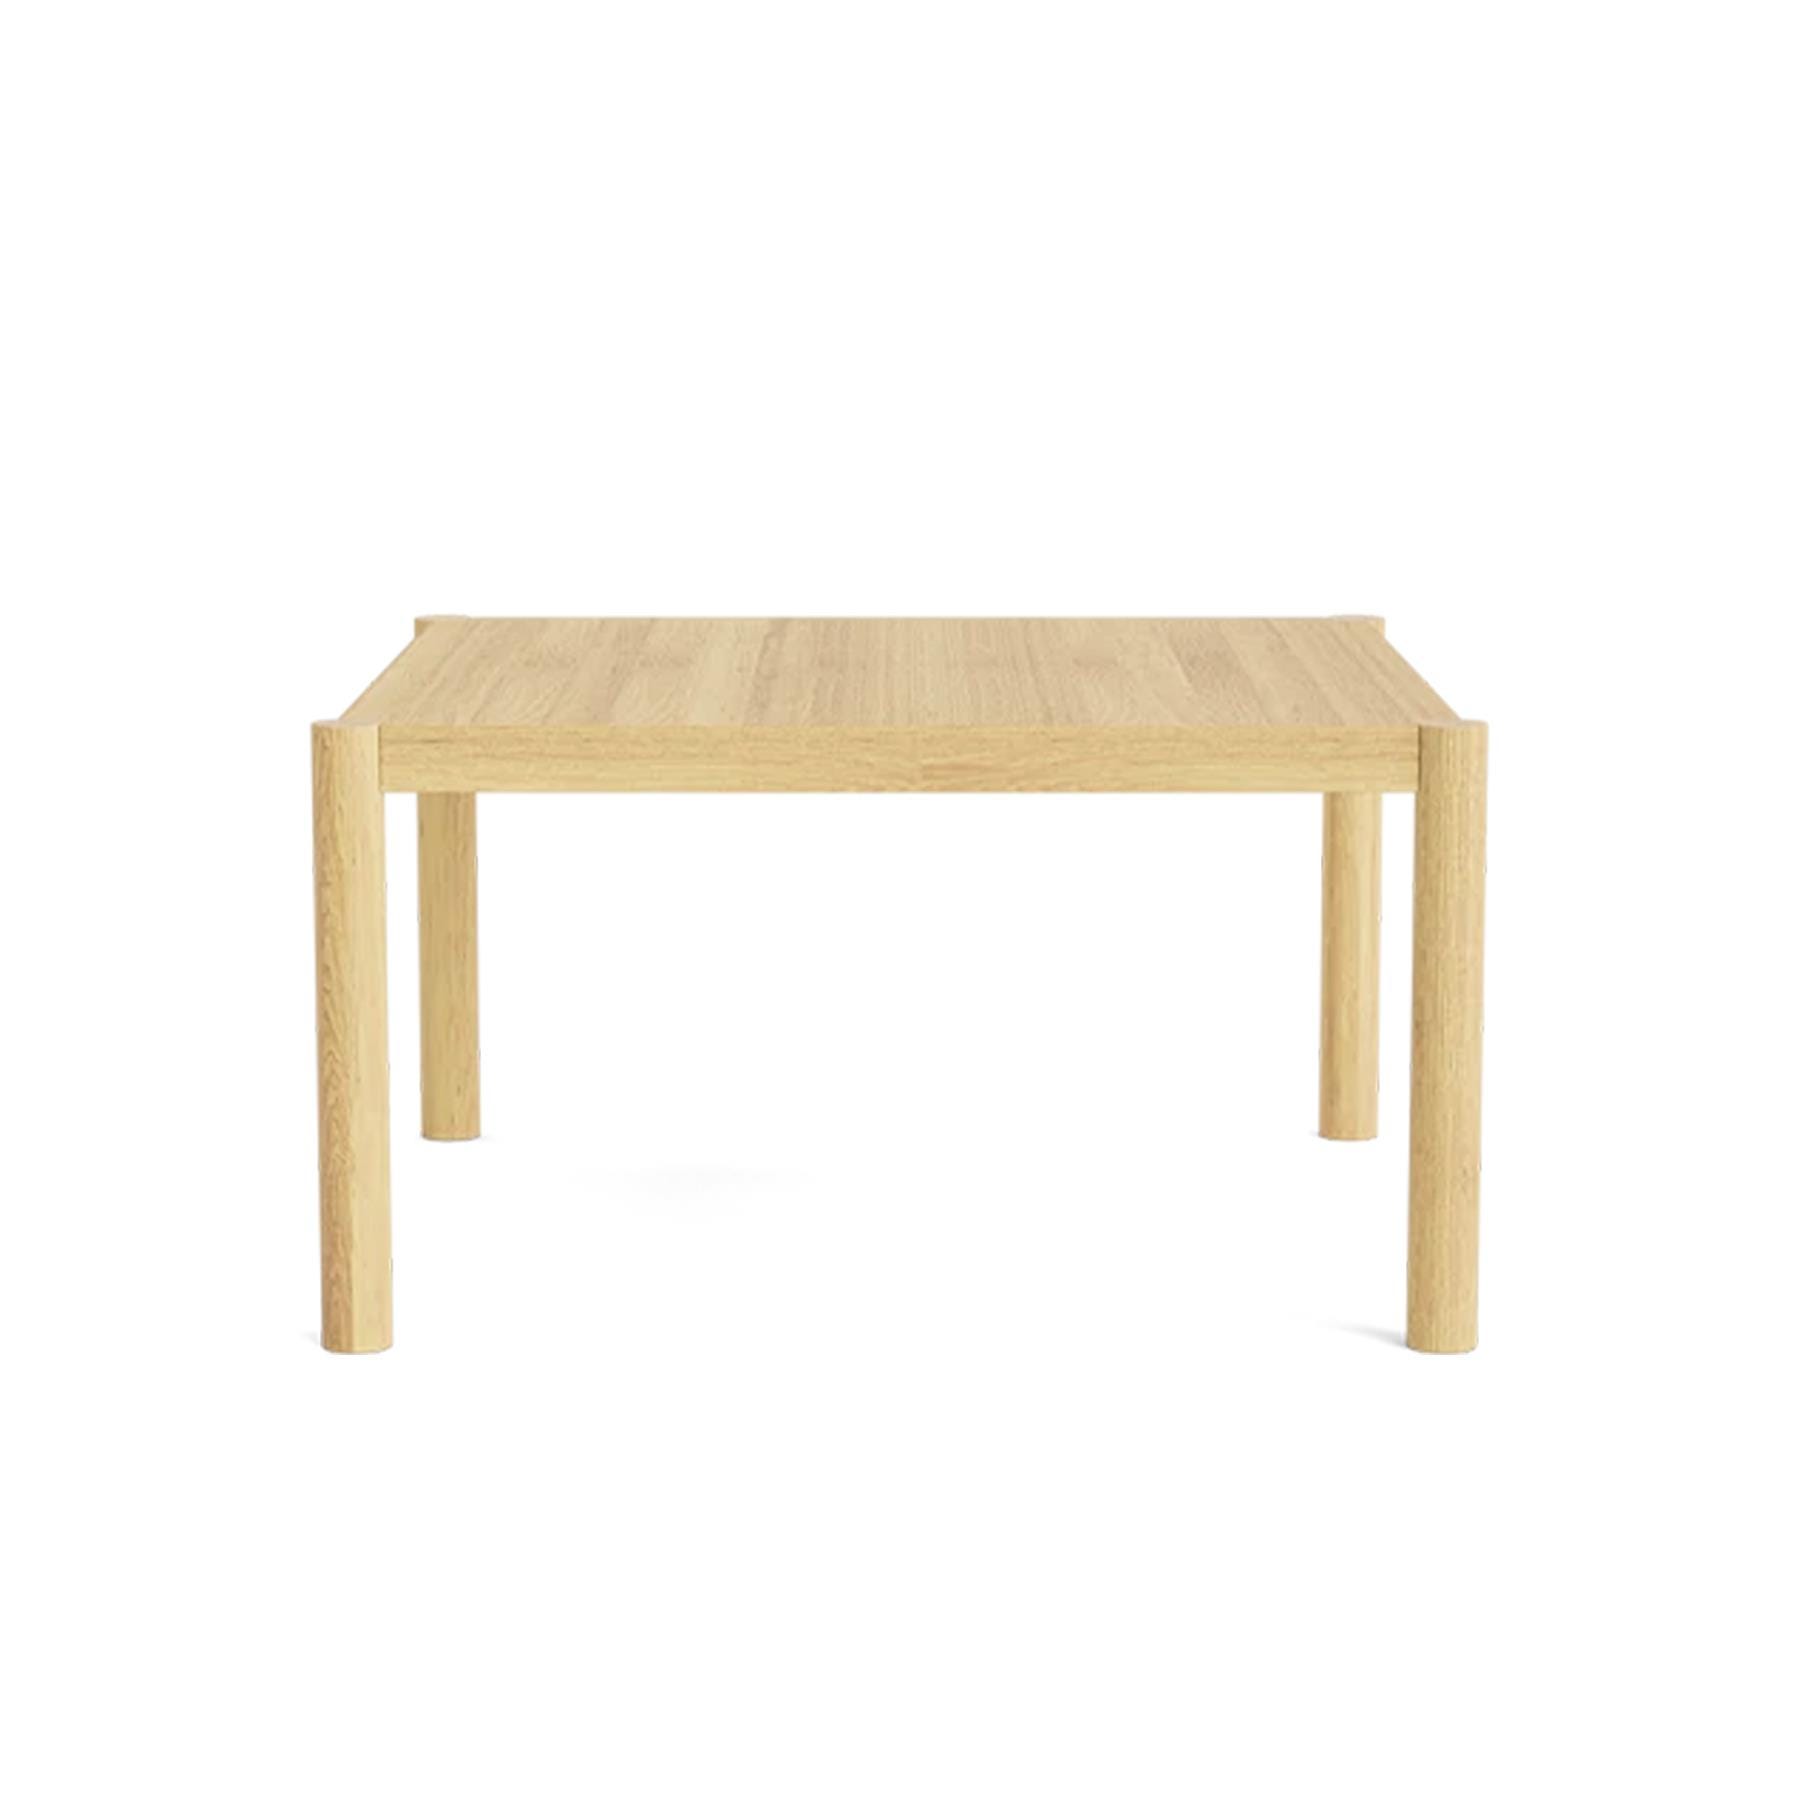 Make Nordic Tammi Coffee Table Square Height 38cm Oak Natural Oil Light Wood Designer Furniture From Holloways Of Ludlow